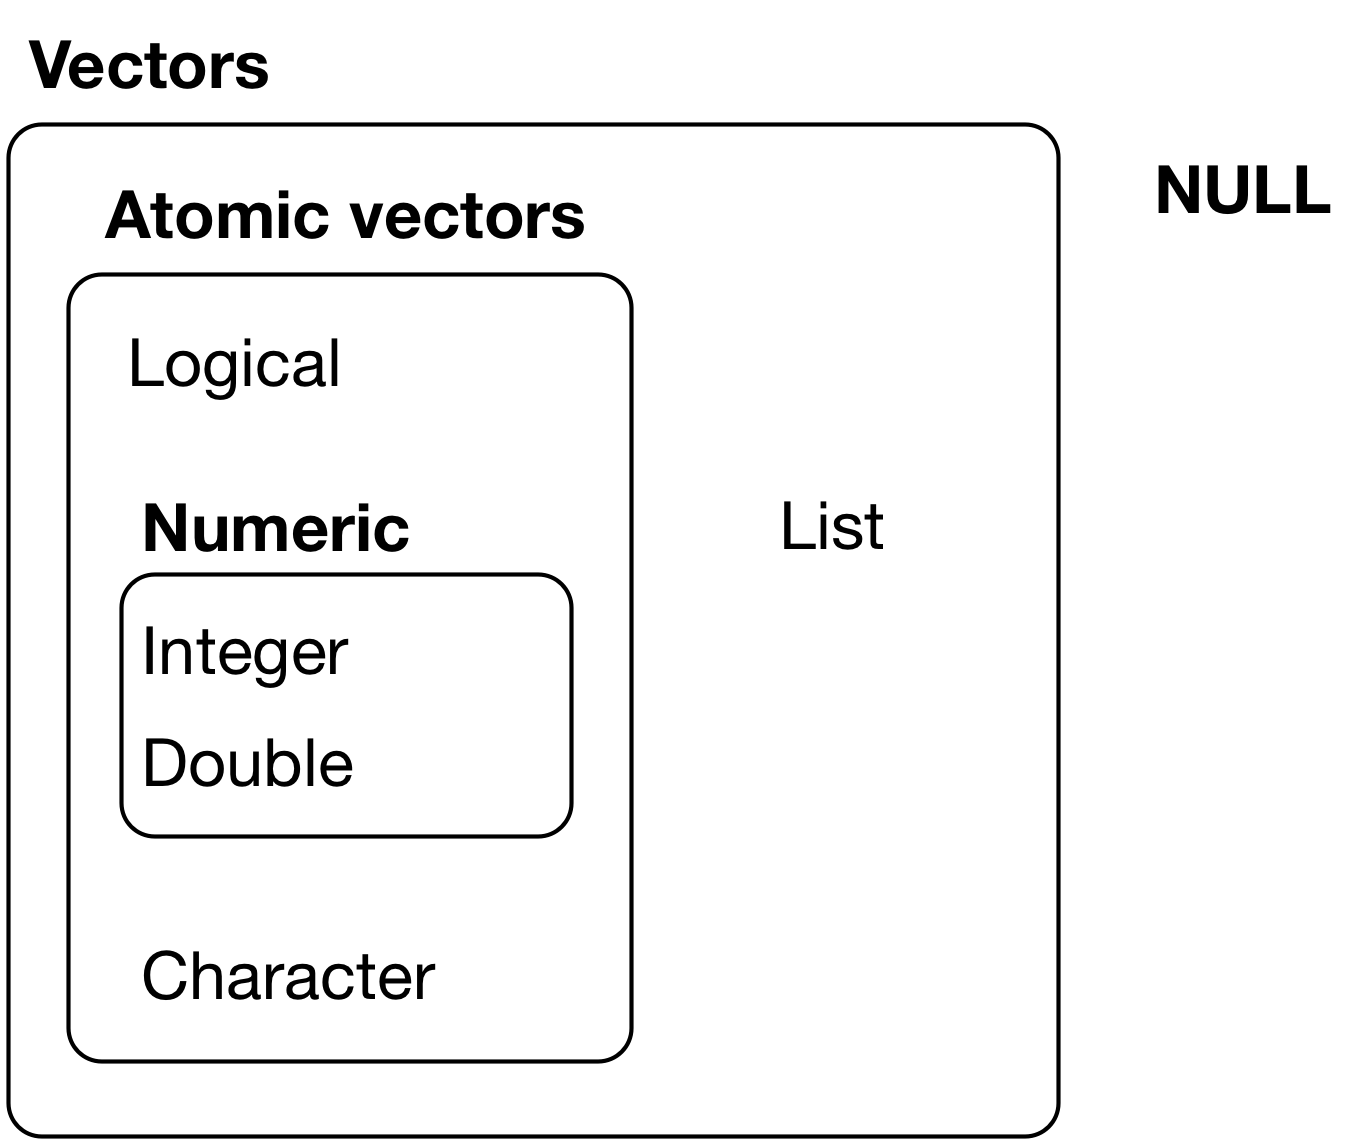 Vector hierarchy. Source: [R4DS](https://r4ds.had.co.nz/vectors.html) licensed under [CC BY-NC-ND 3.0 US](https://creativecommons.org/licenses/by-nc-nd/3.0/us/)